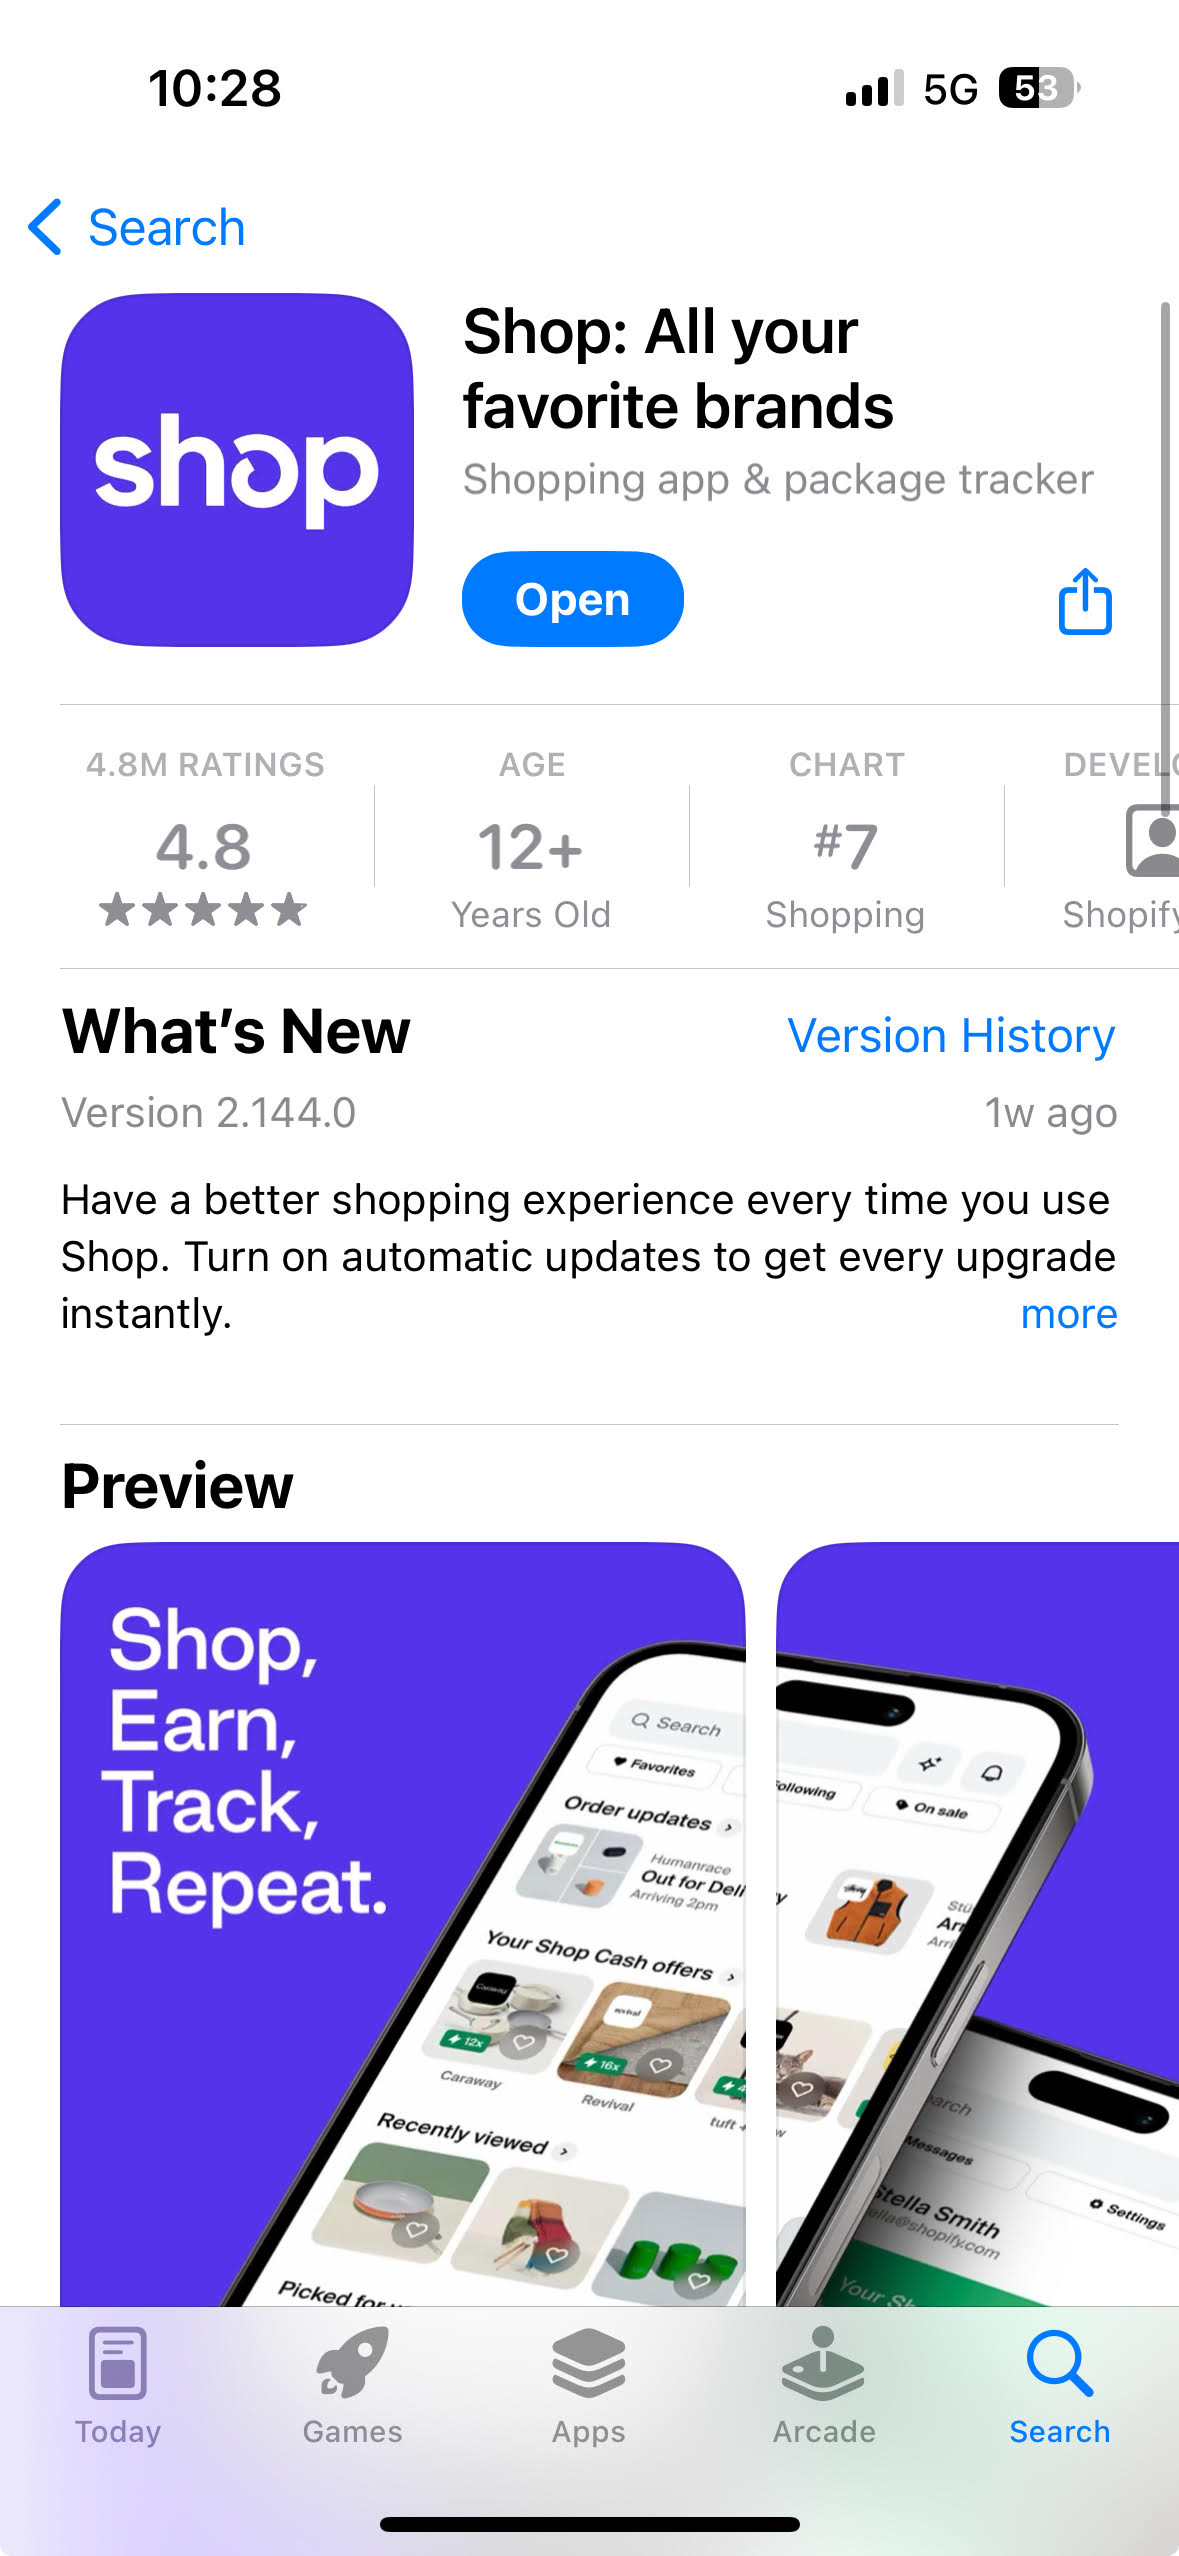 Shop app on Apple Play Store. Title says 'Shop: All your favorite brands'